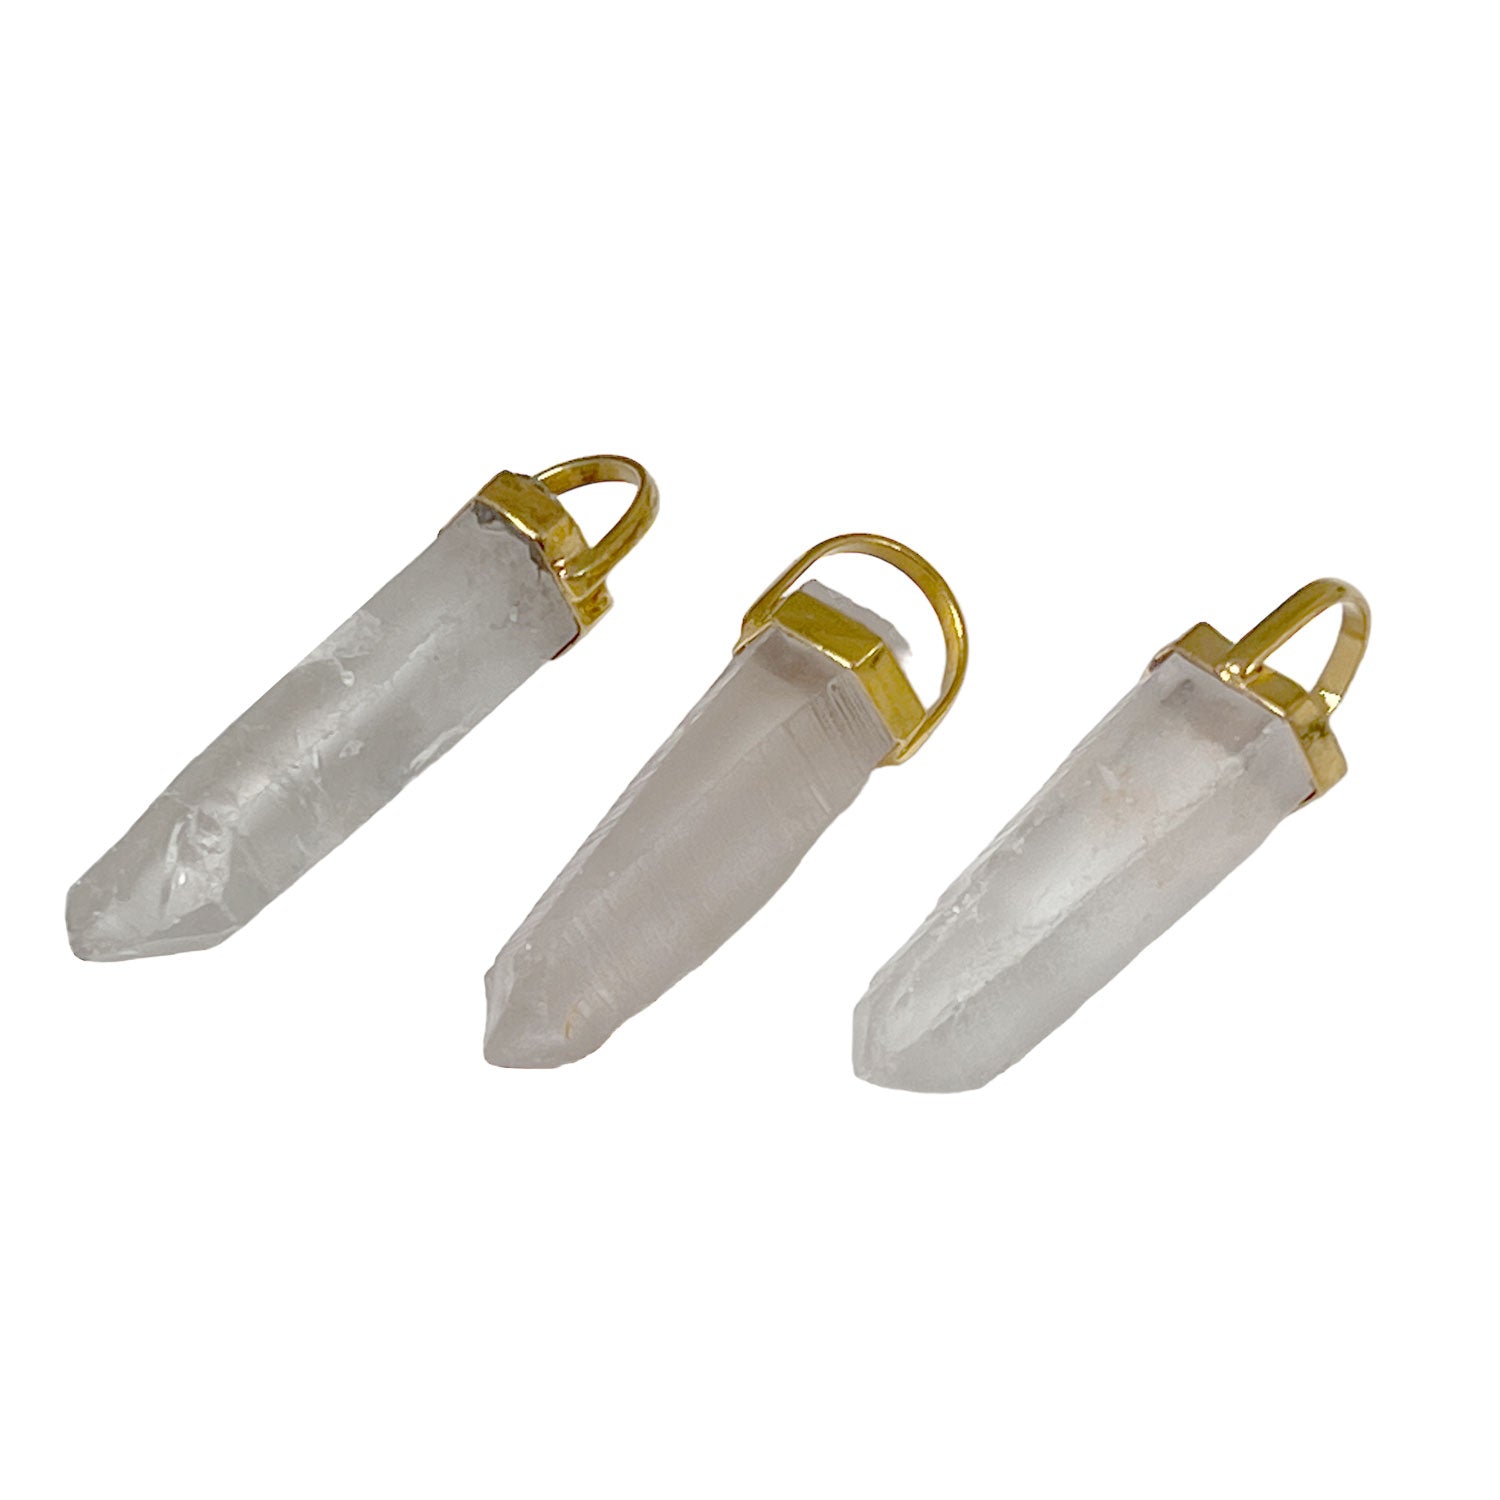 Raw Rock Crystal Point Pendant (sold individually or on a long satellite chain)